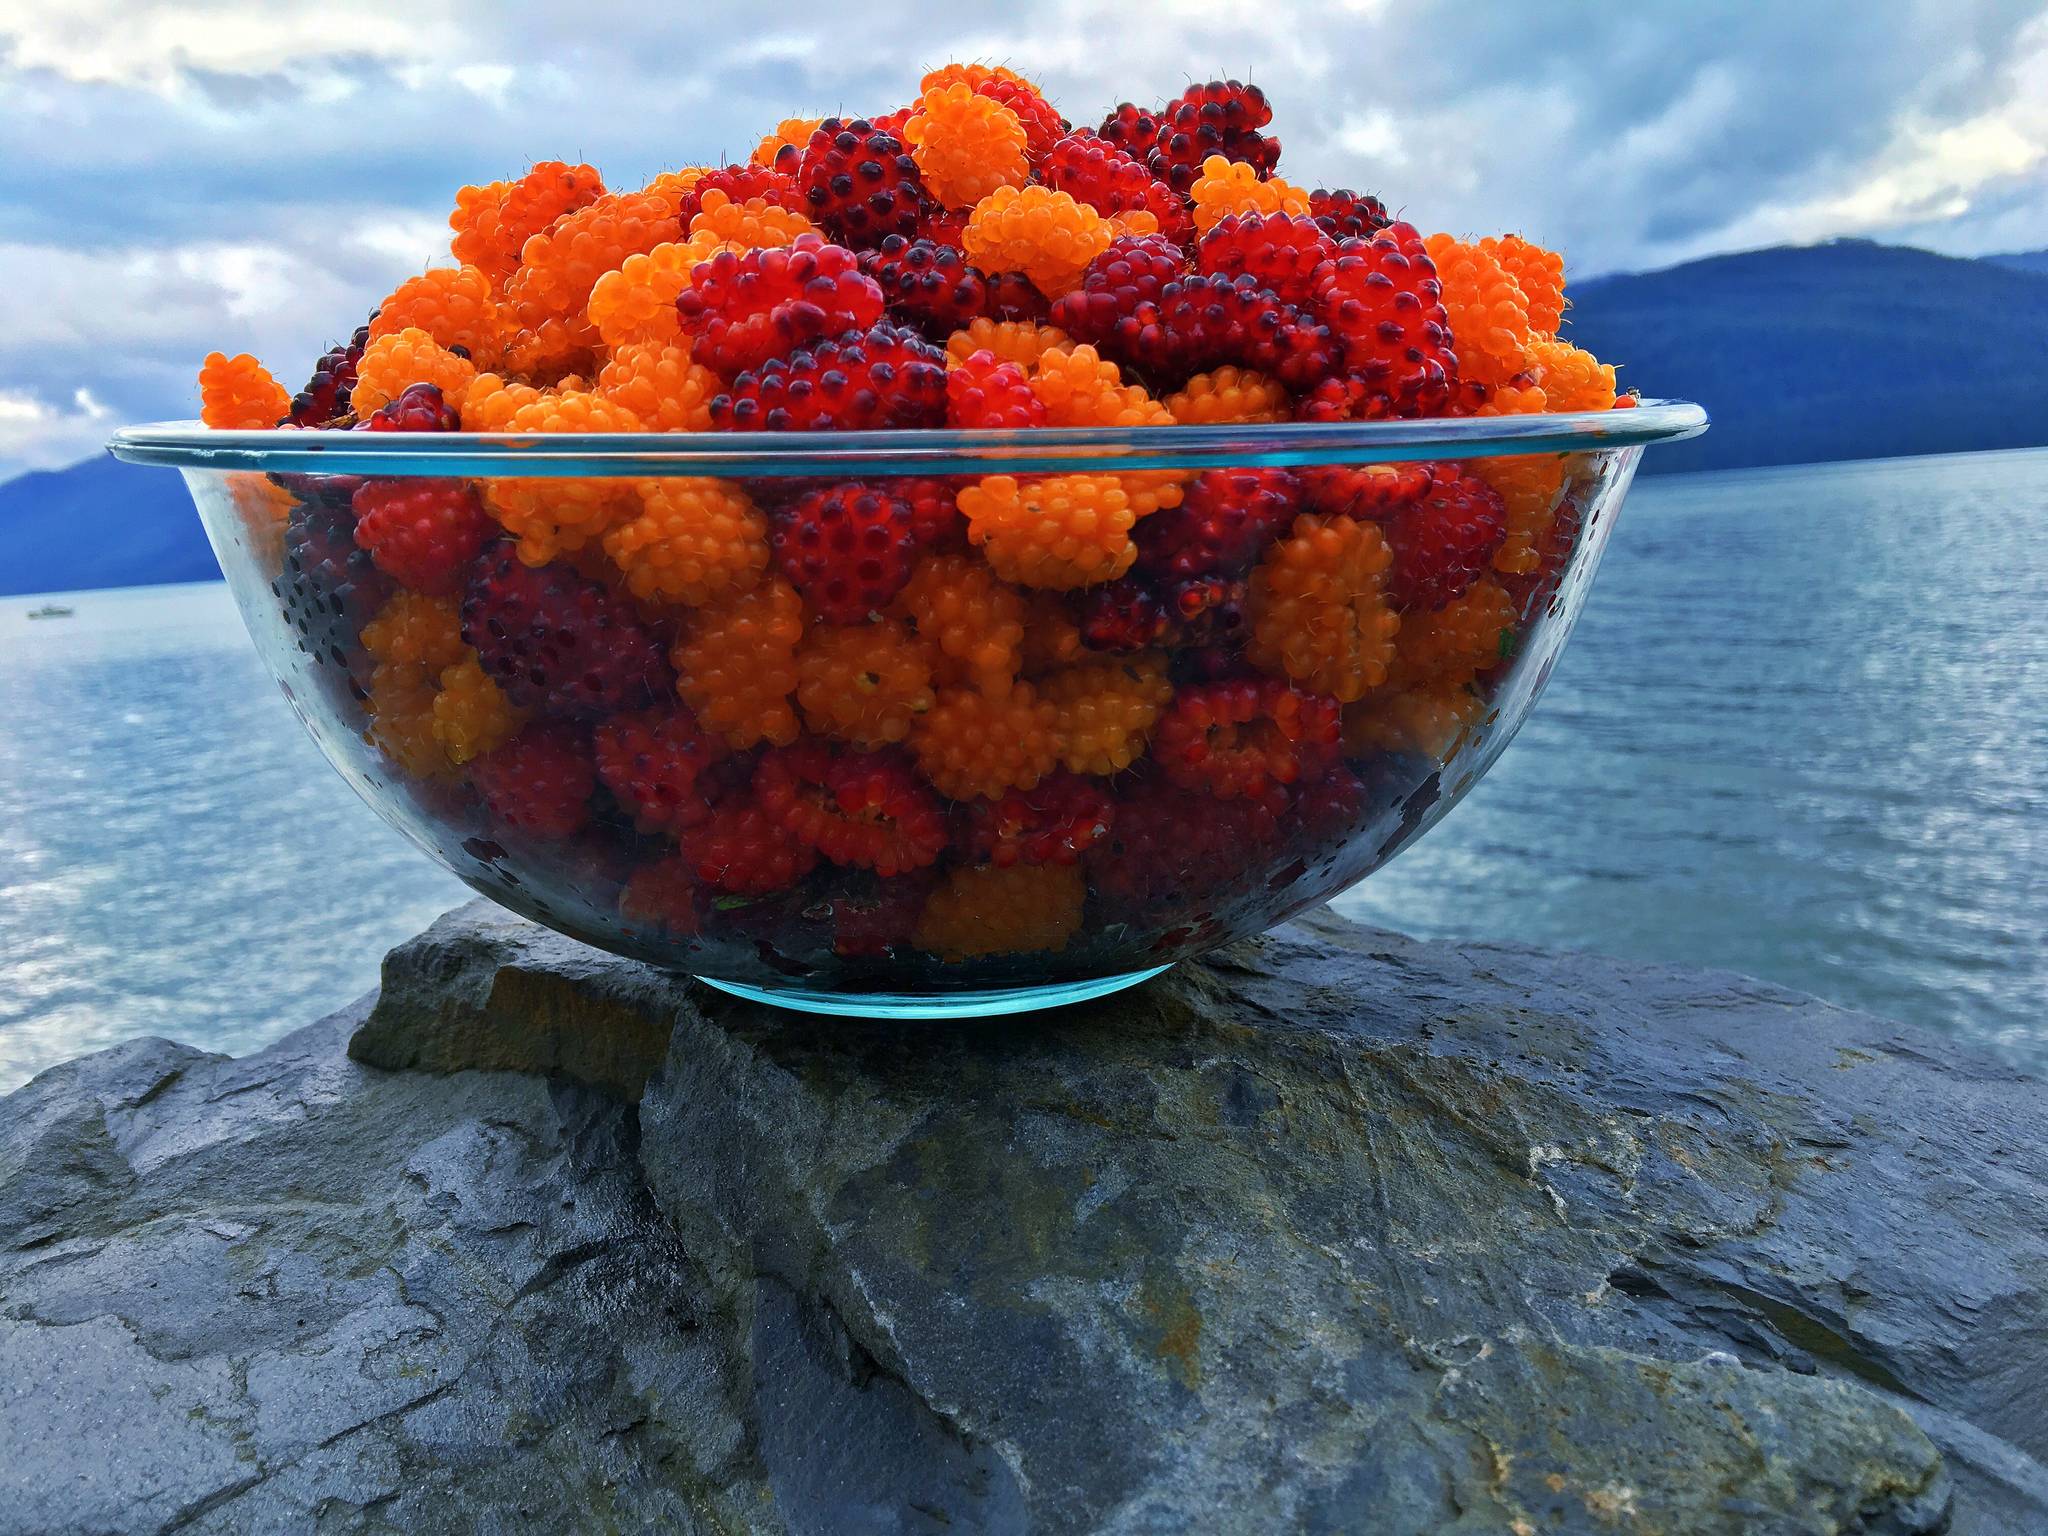 A bowl of freshly picked salmonberries. Vivian Mork Yéilk’ | For the Capital City Weekly